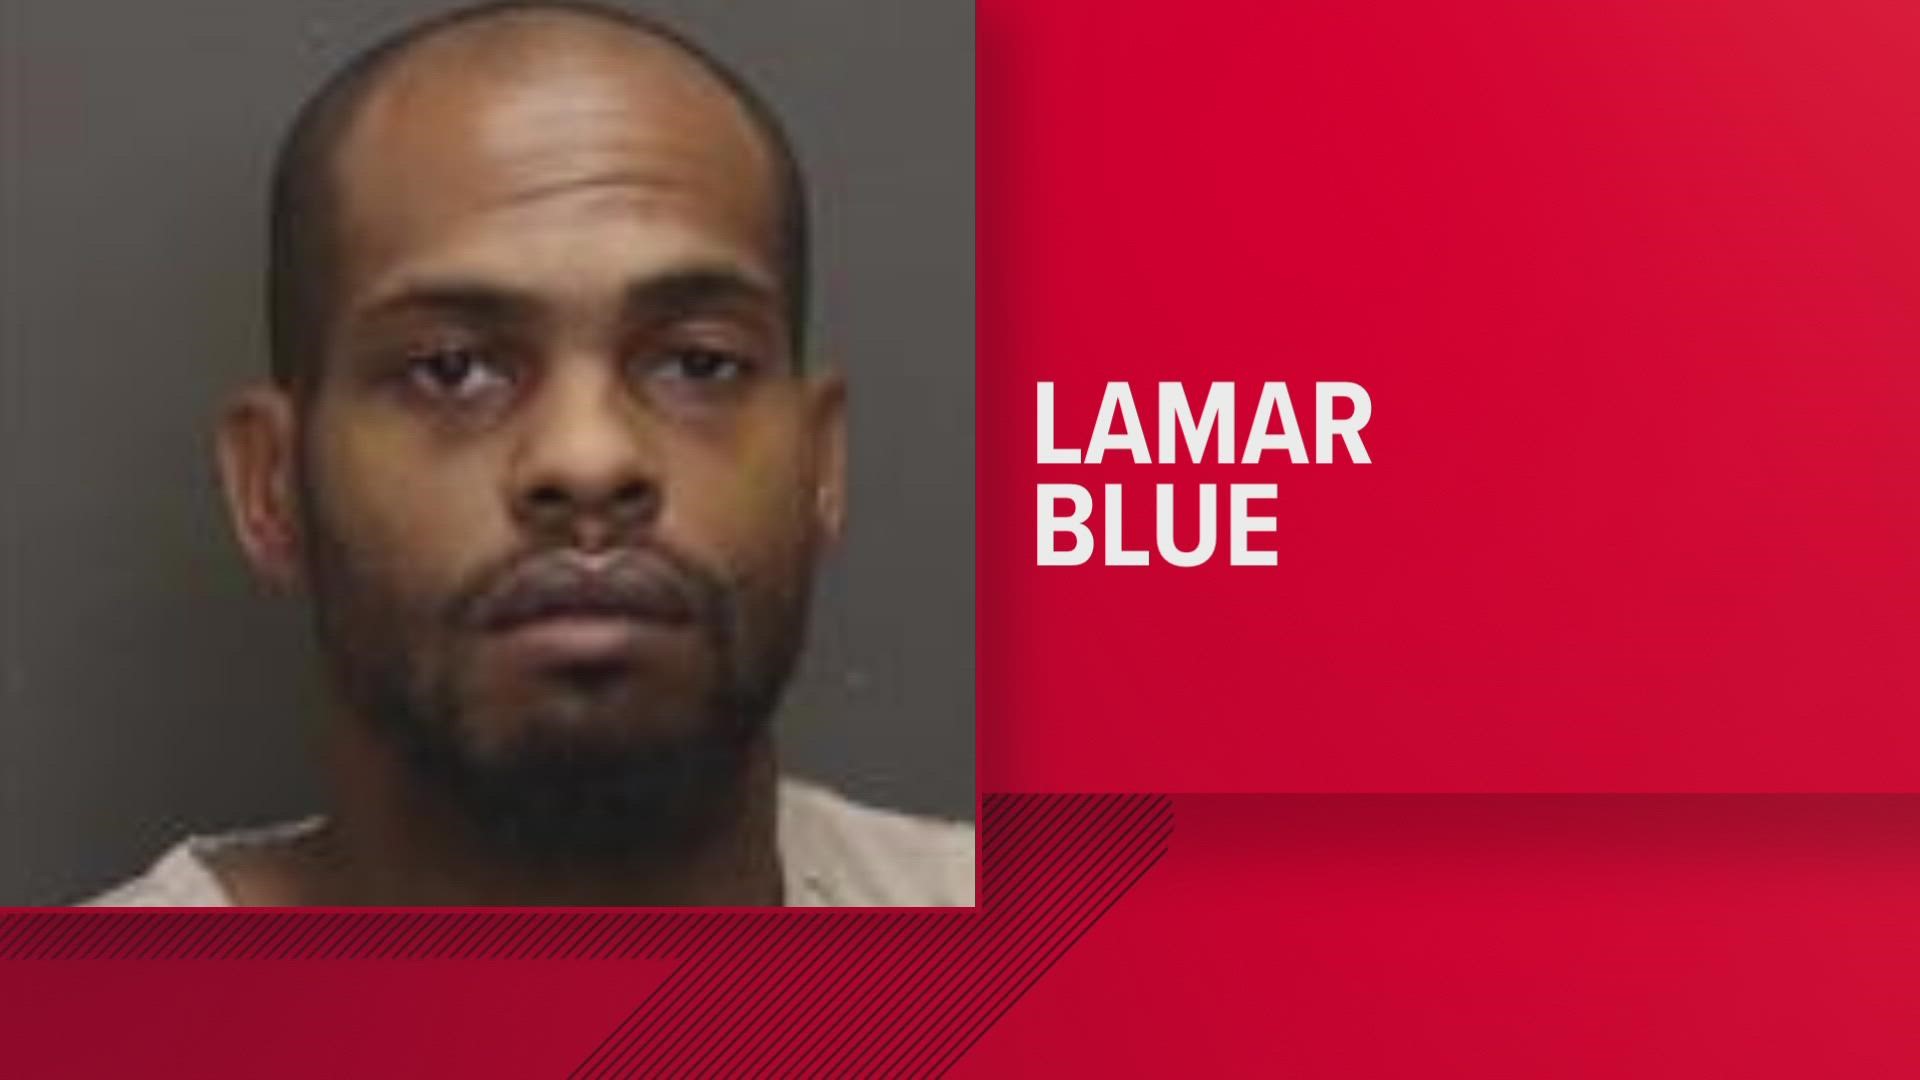 Lamar Blue, 36, is charged with two counts of felonious assault after firing shots at officers in the 600 block of Kingsford Road.